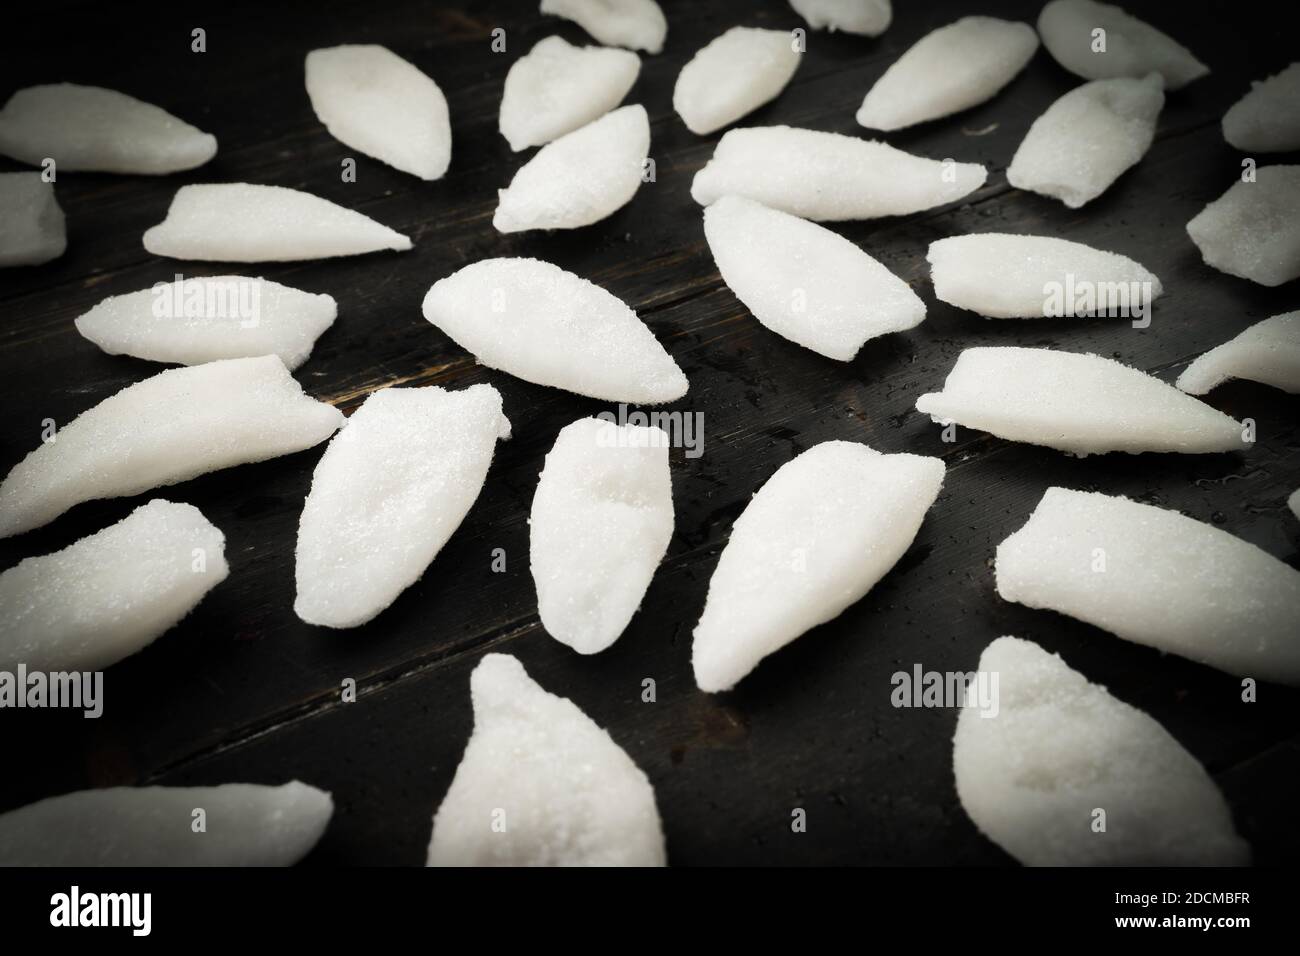 Frozen slices of squid on the black background. Hipster style pattern Stock Photo